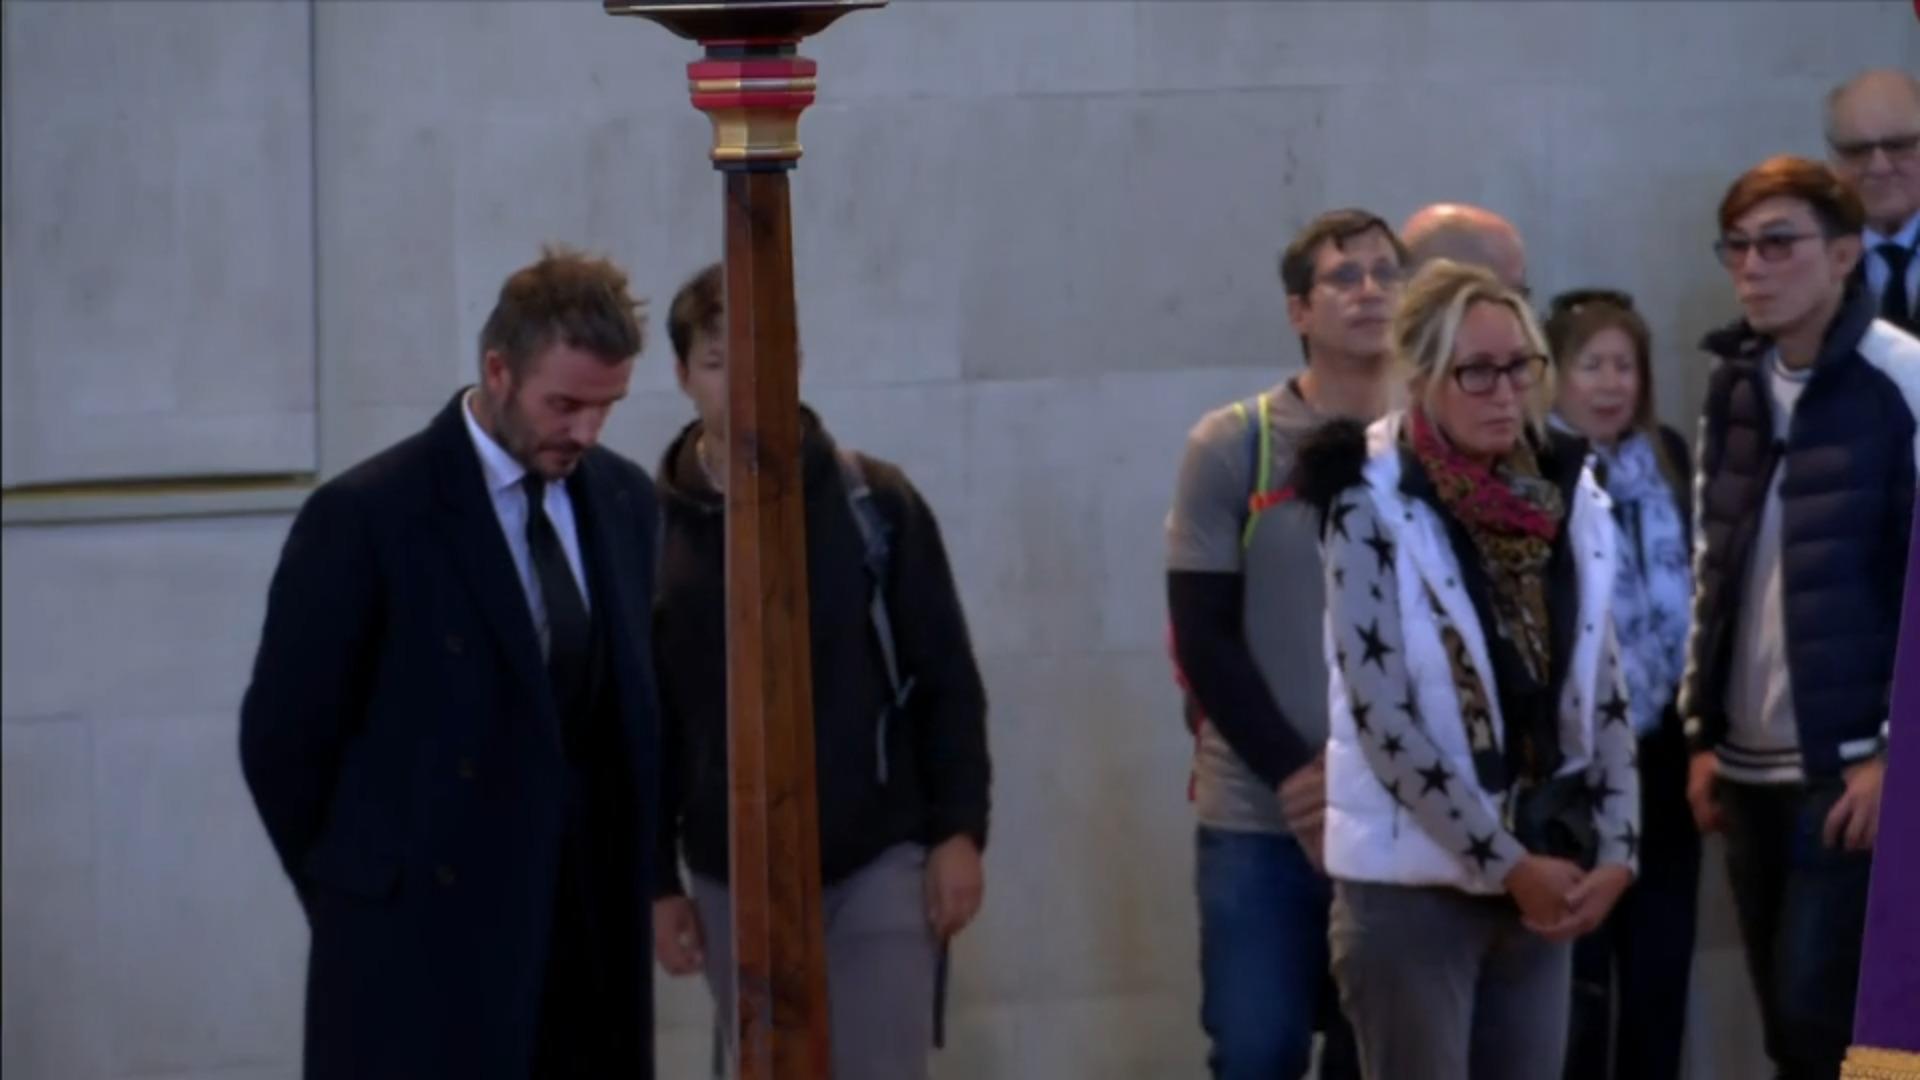 David Beckham bows to the coffin of the Queen he has been looking at it for 14 hours